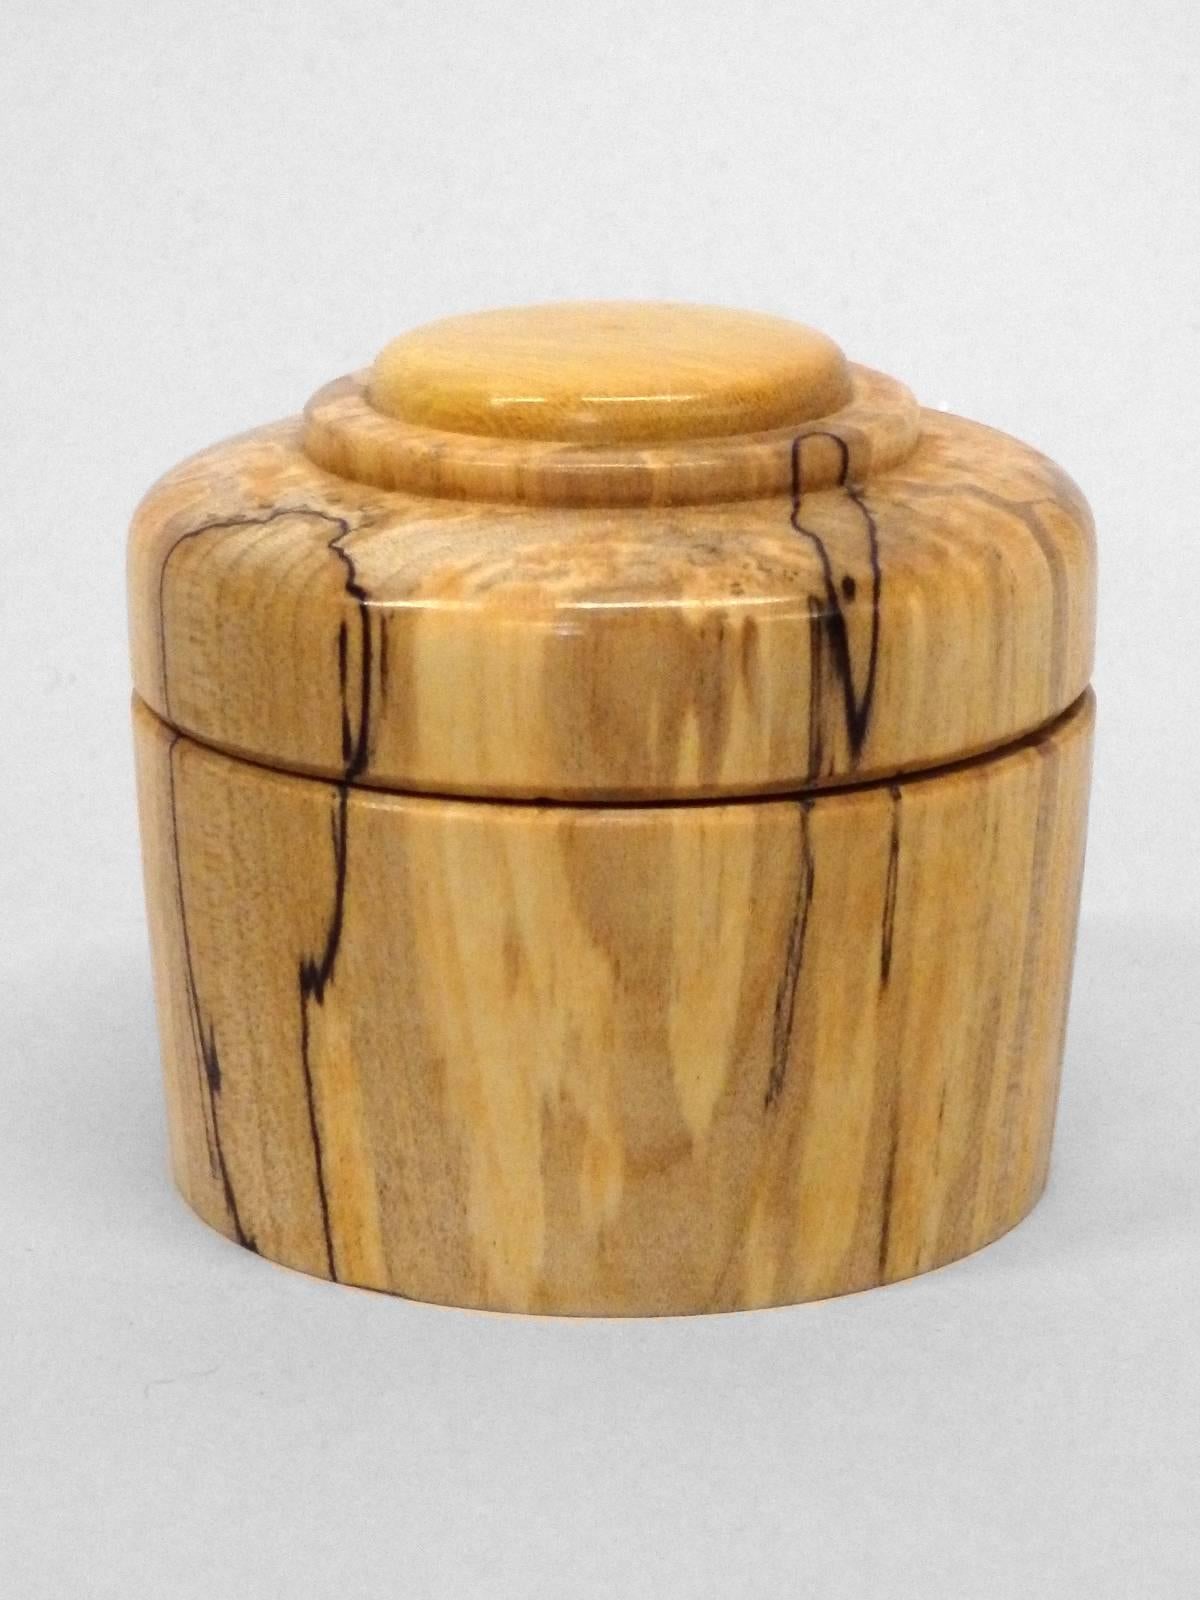 Four Studio Turned Wood Gift Canisters by Steve Sharpe In Excellent Condition For Sale In Ferndale, MI